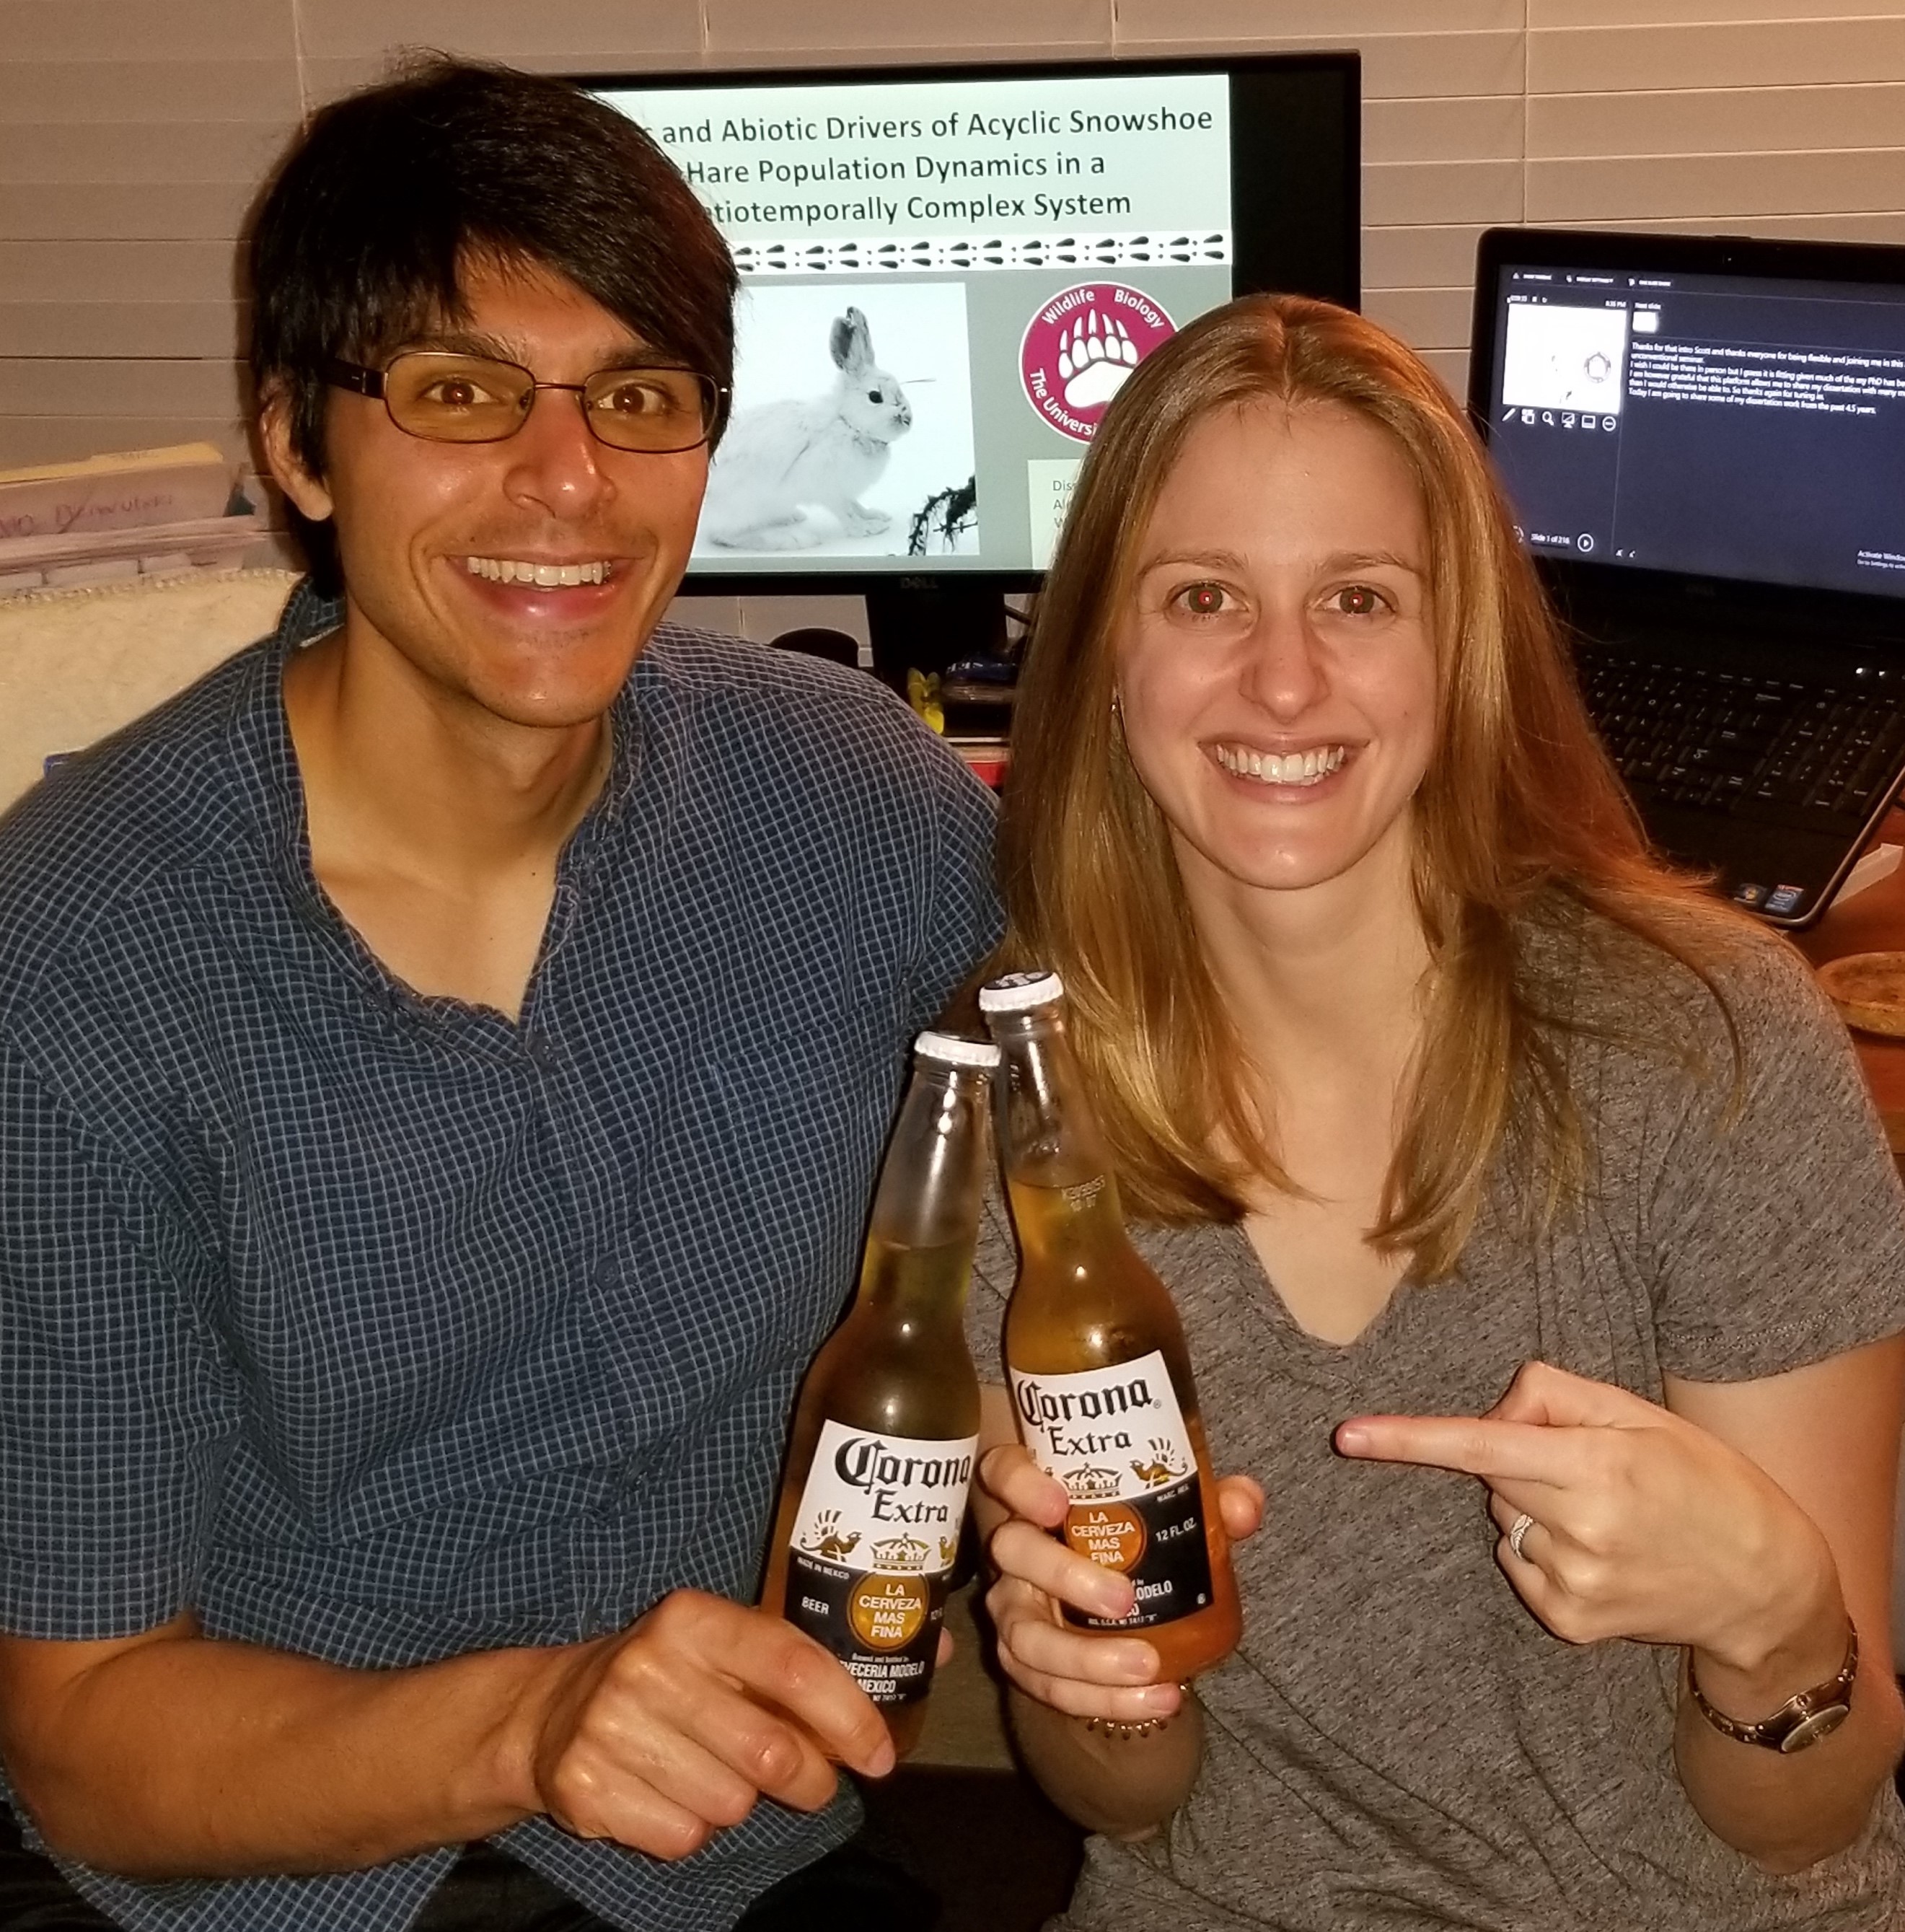 Alex and his fiancée Kara celebrating no revisions with the better Corona